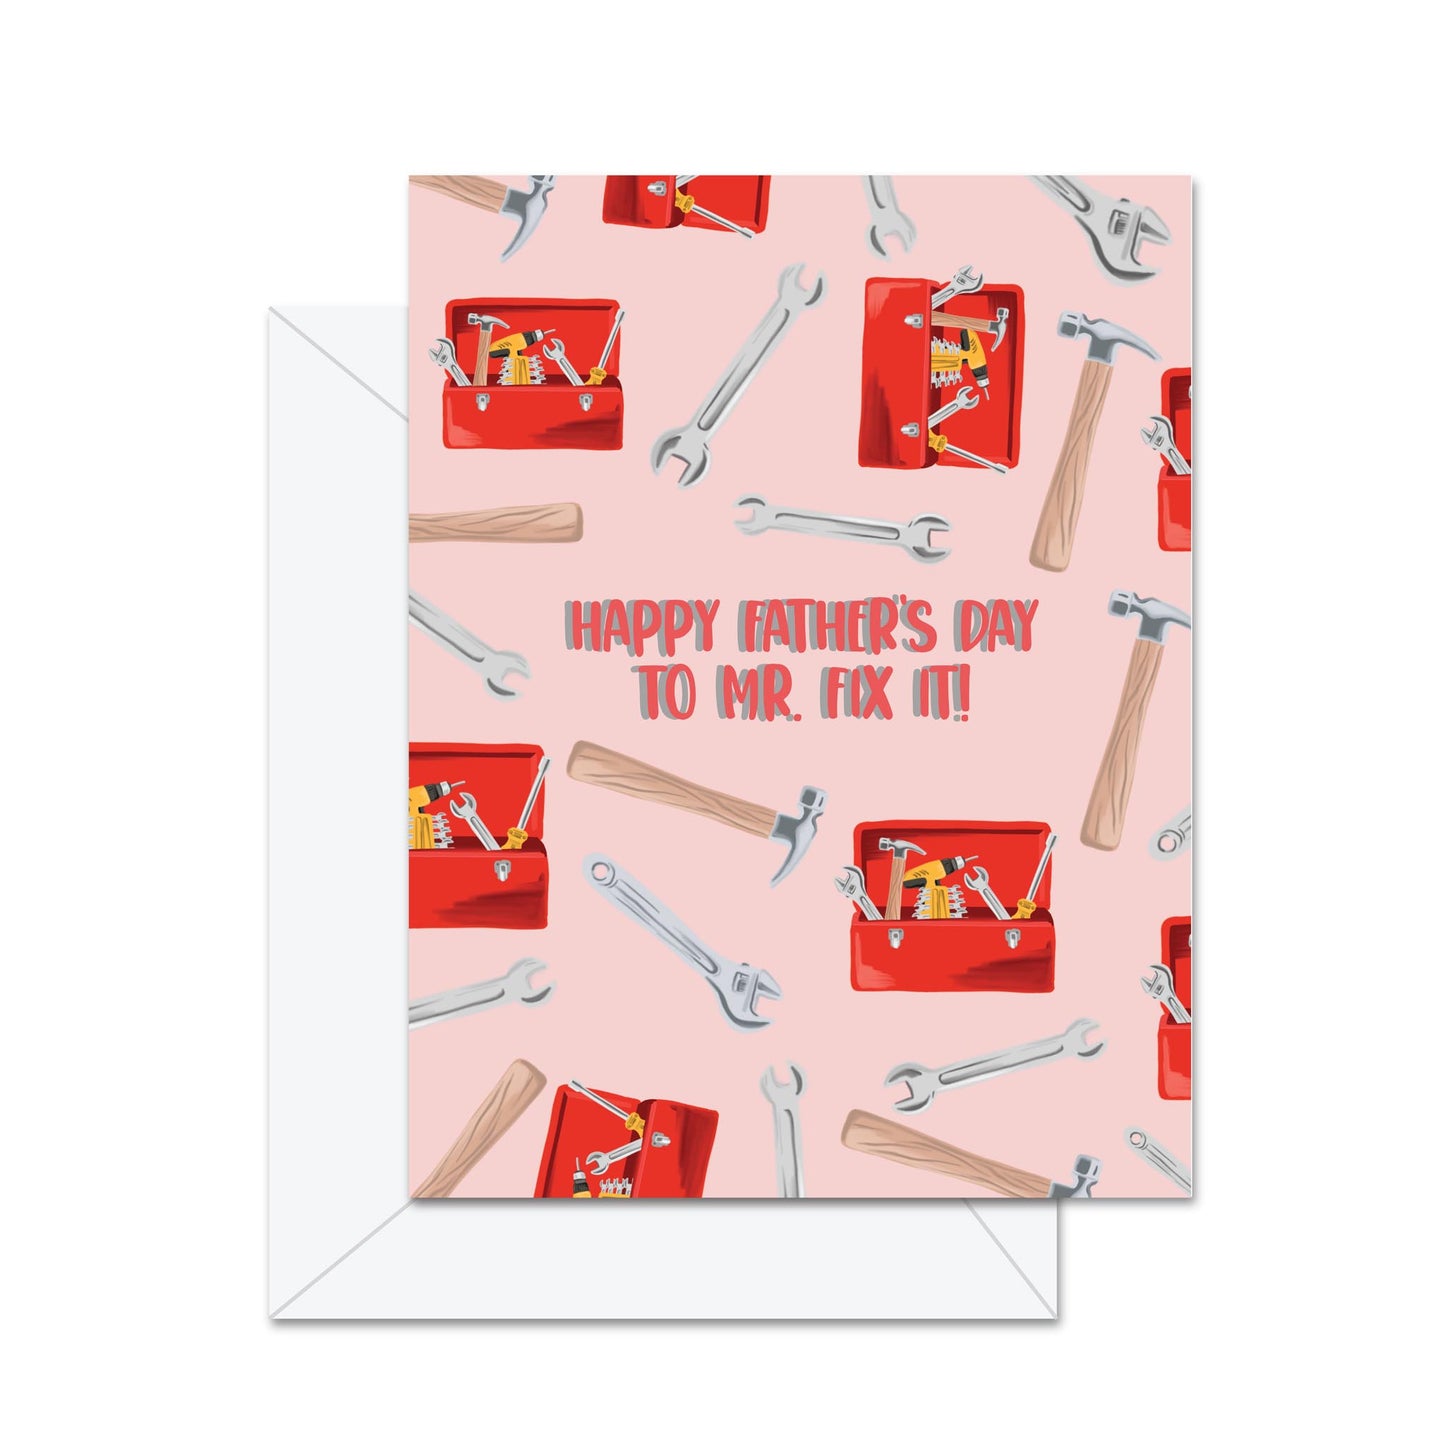 Happy Father's Day To Mr. Fix It - Greeting Card